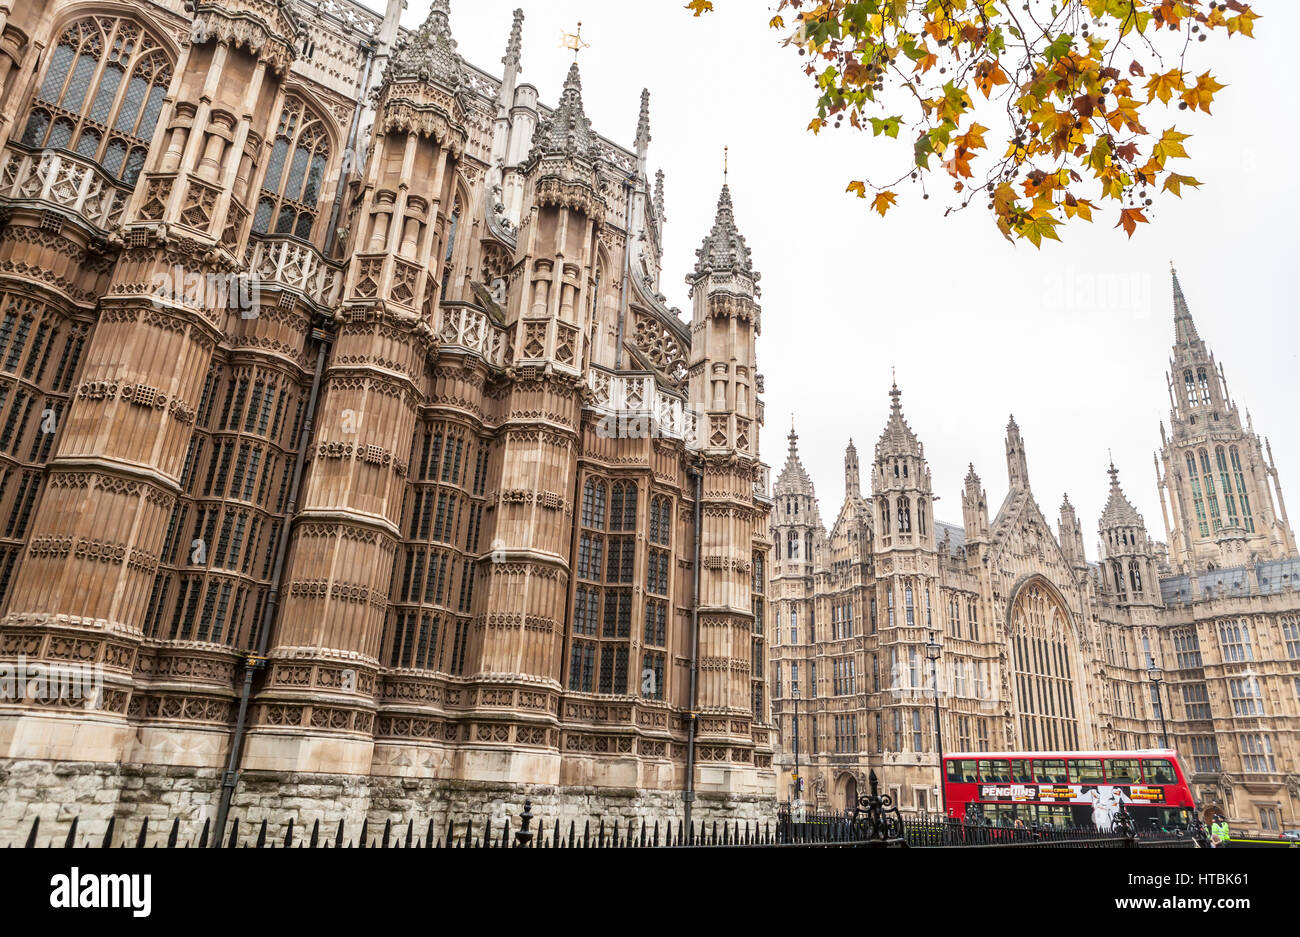 A view of both a portion of Westminster Abbey and Westminster Palace where the House of Lords and House of Commons exist, London, England, United King Stock Photo